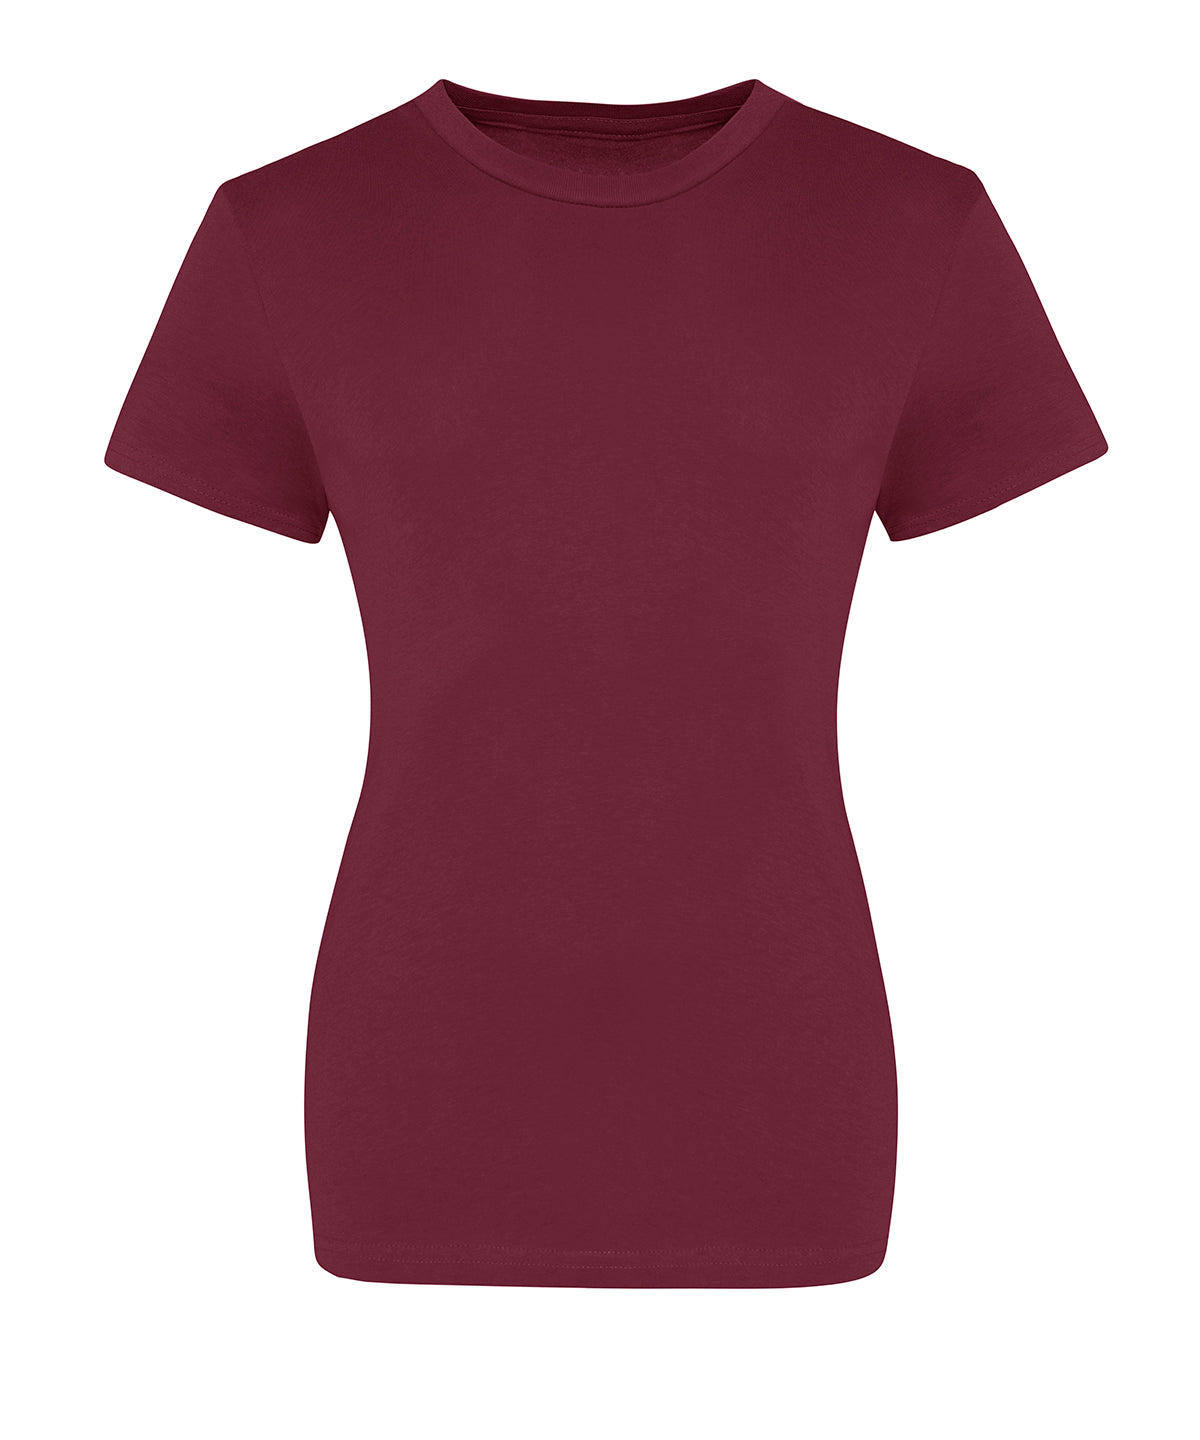 Personalised T-Shirts - Burgundy AWDis Just T's The 100 girlie T